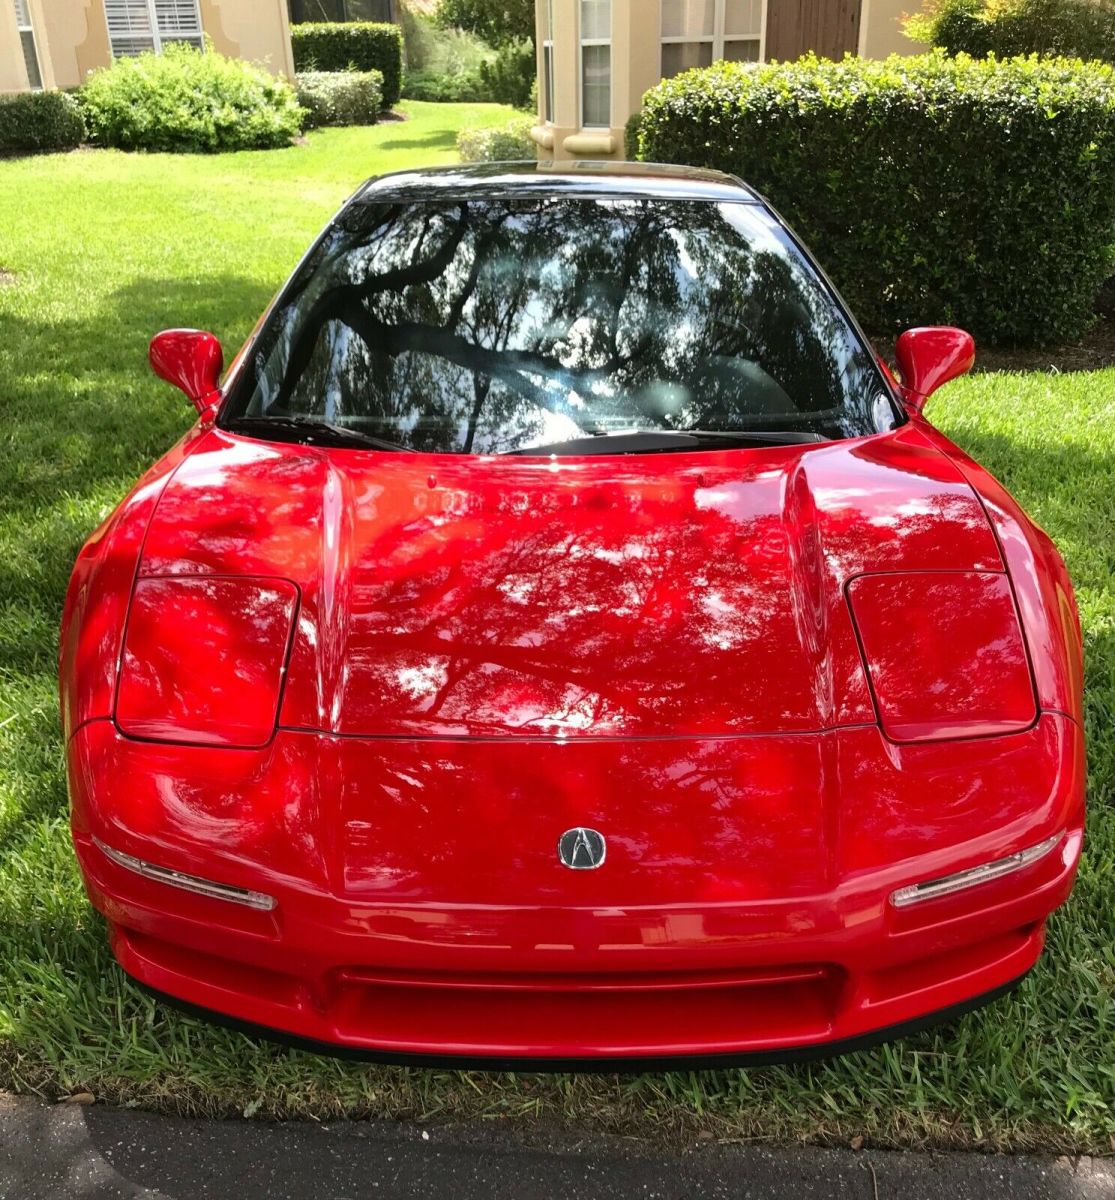 1991 Acura NSX Original, like new condition, collector investment auto.